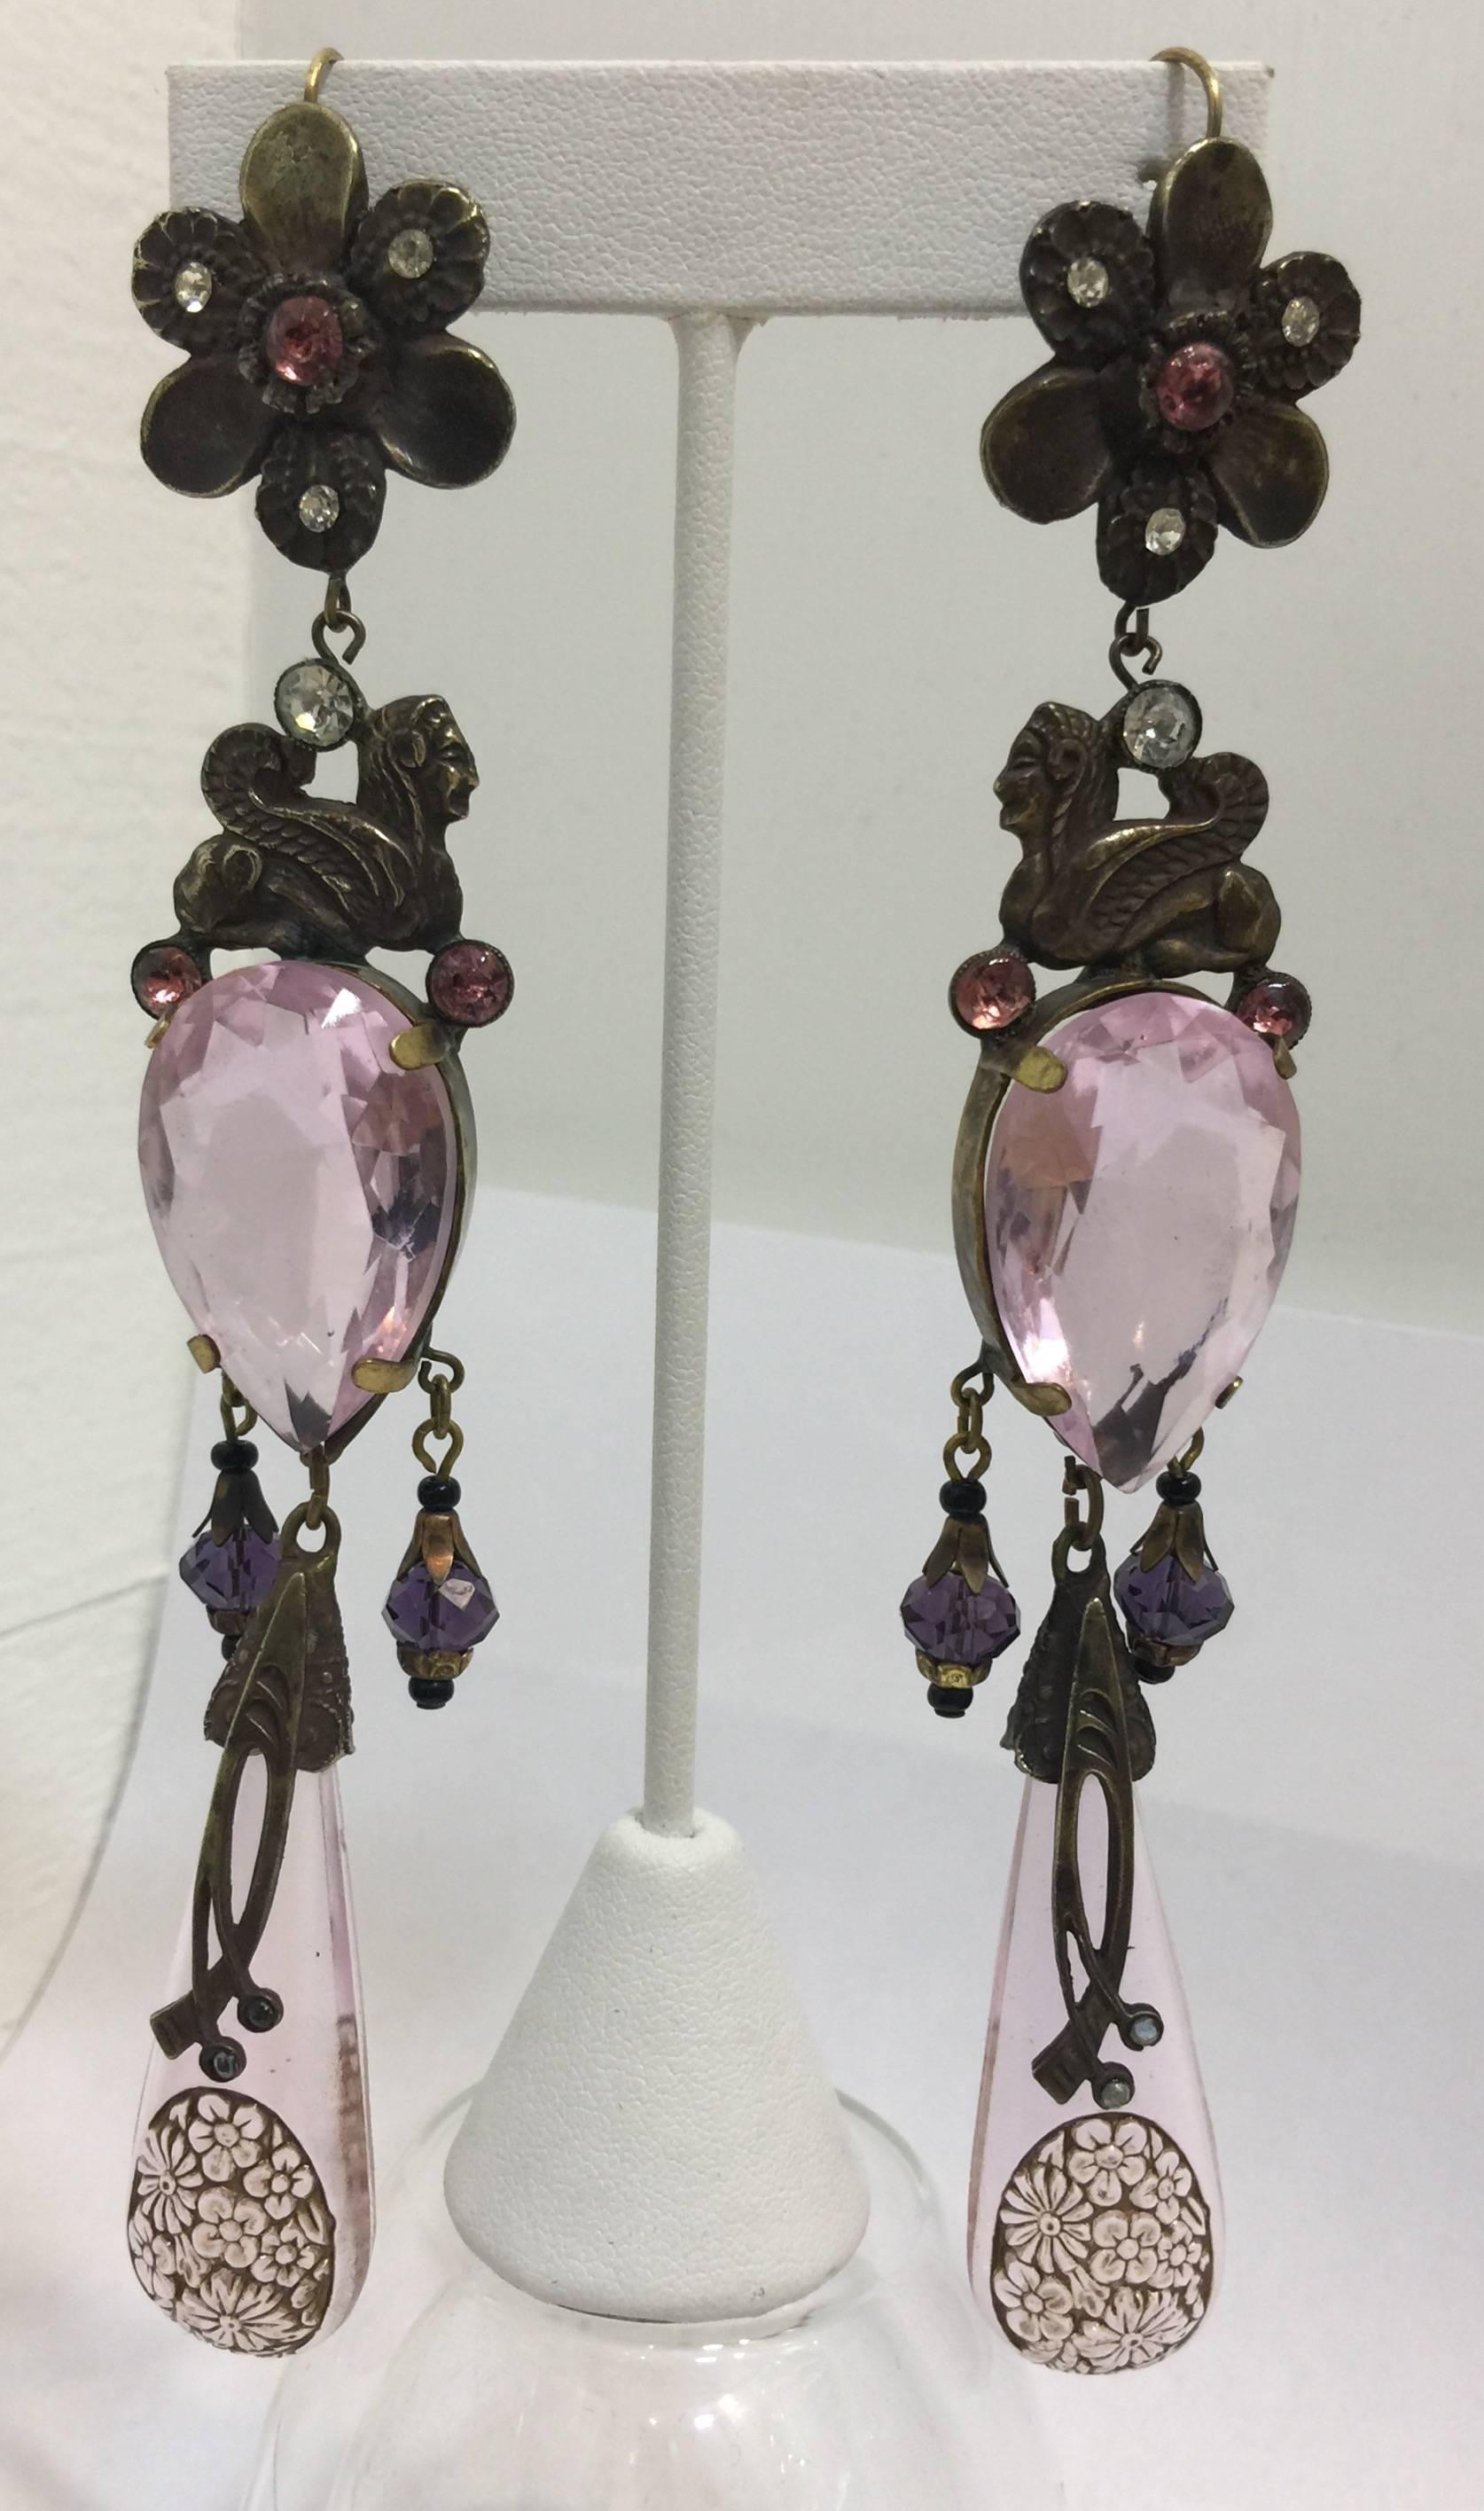 Shoulder duster 1920's Egyptian inspired Czech glass crystal drop chandelier earrings made from etched pink crystal drops and a large pink crystal stone. Metal appears to be antiqued brass. Pierced, French hooks. Design features flower tops, Sphinx